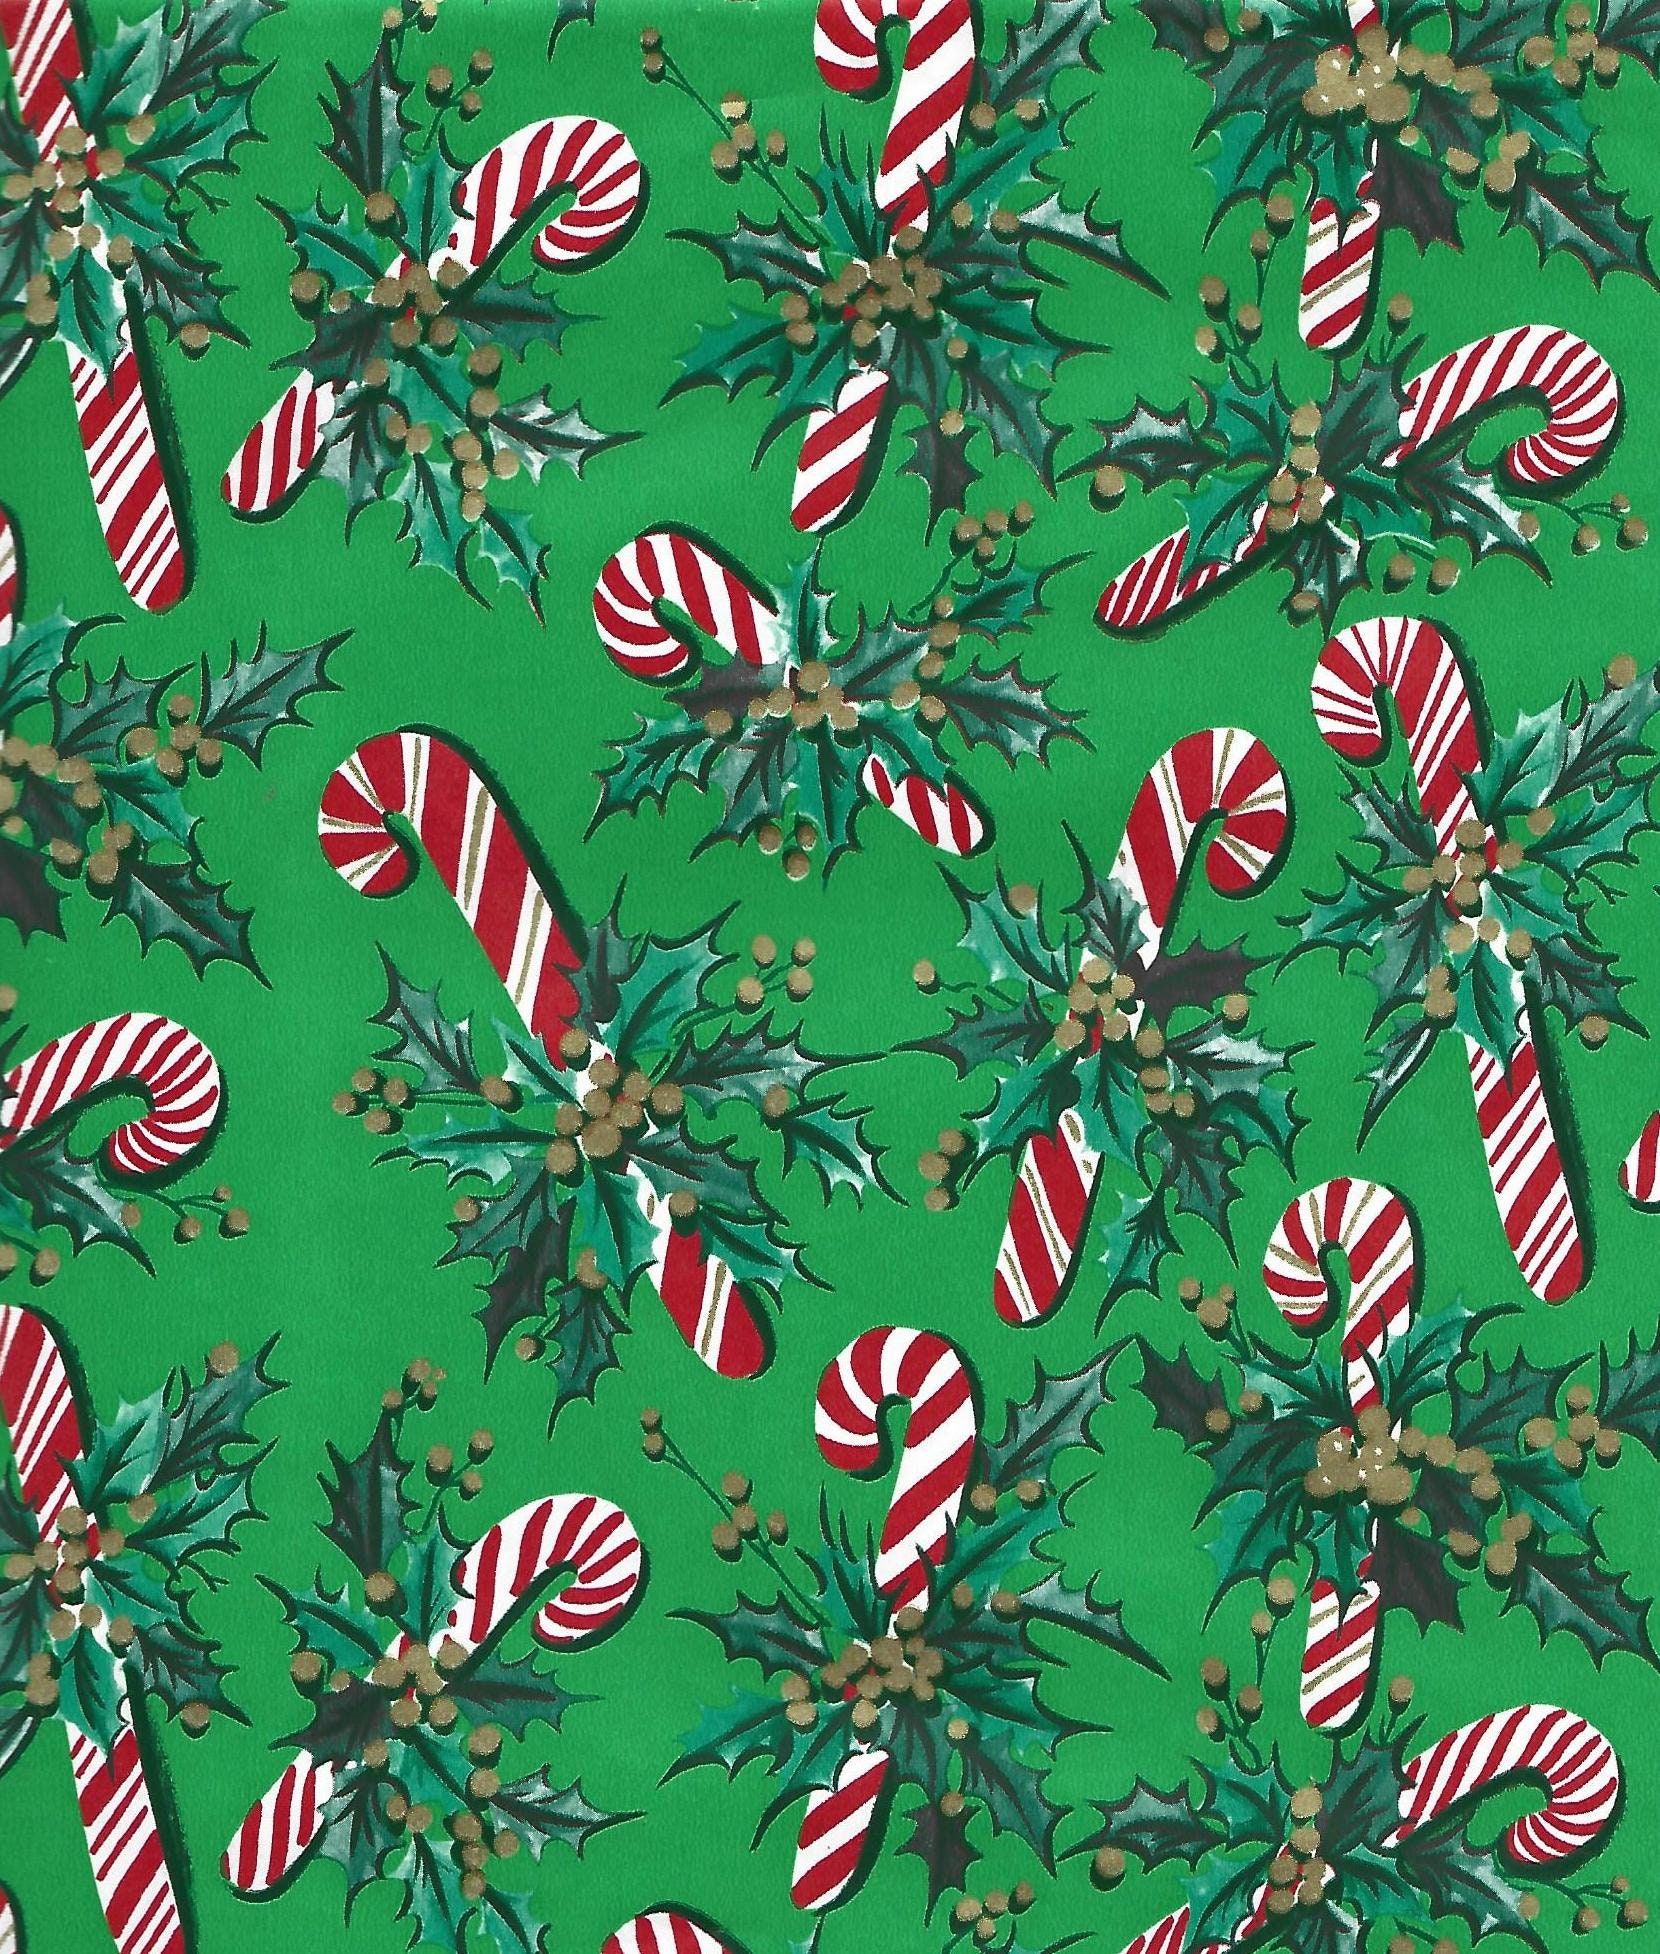 Large Dark Forest Green Candy Cane Stripes Wrapping Paper by